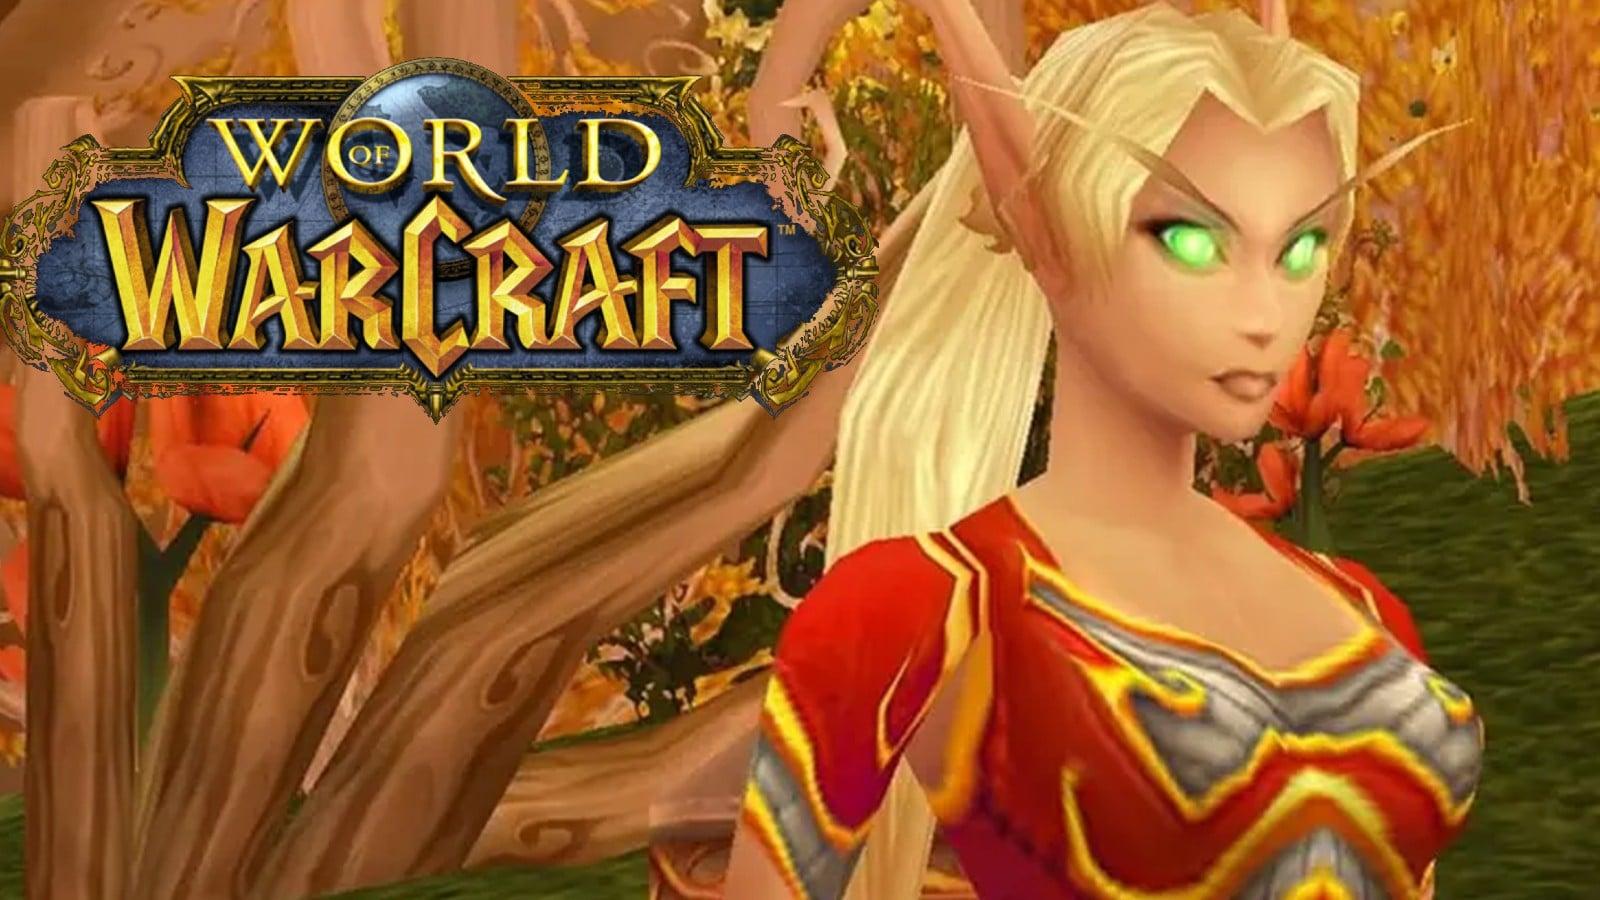 Blood elf in WoW with game logo